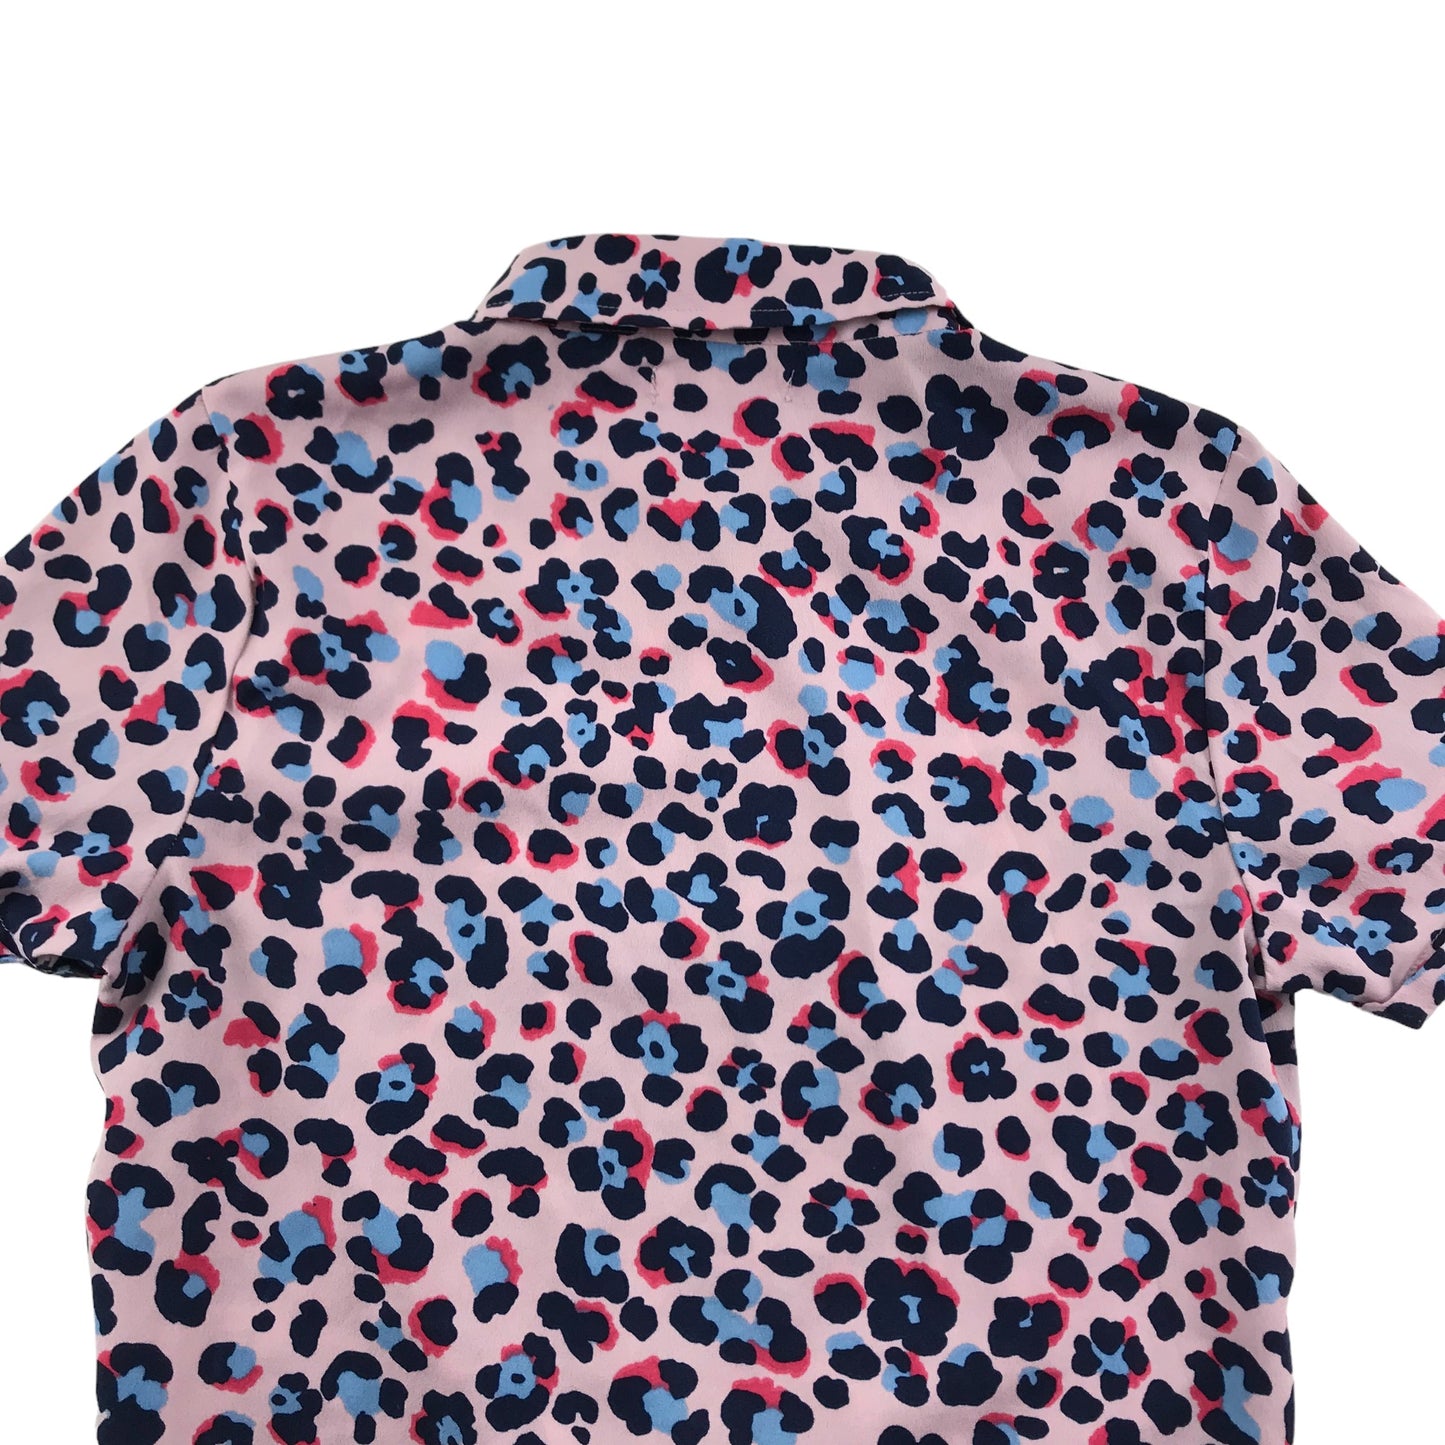 Bluezoo Top Age 10 Pink Leopard Spots Cropped Blouse Shirt